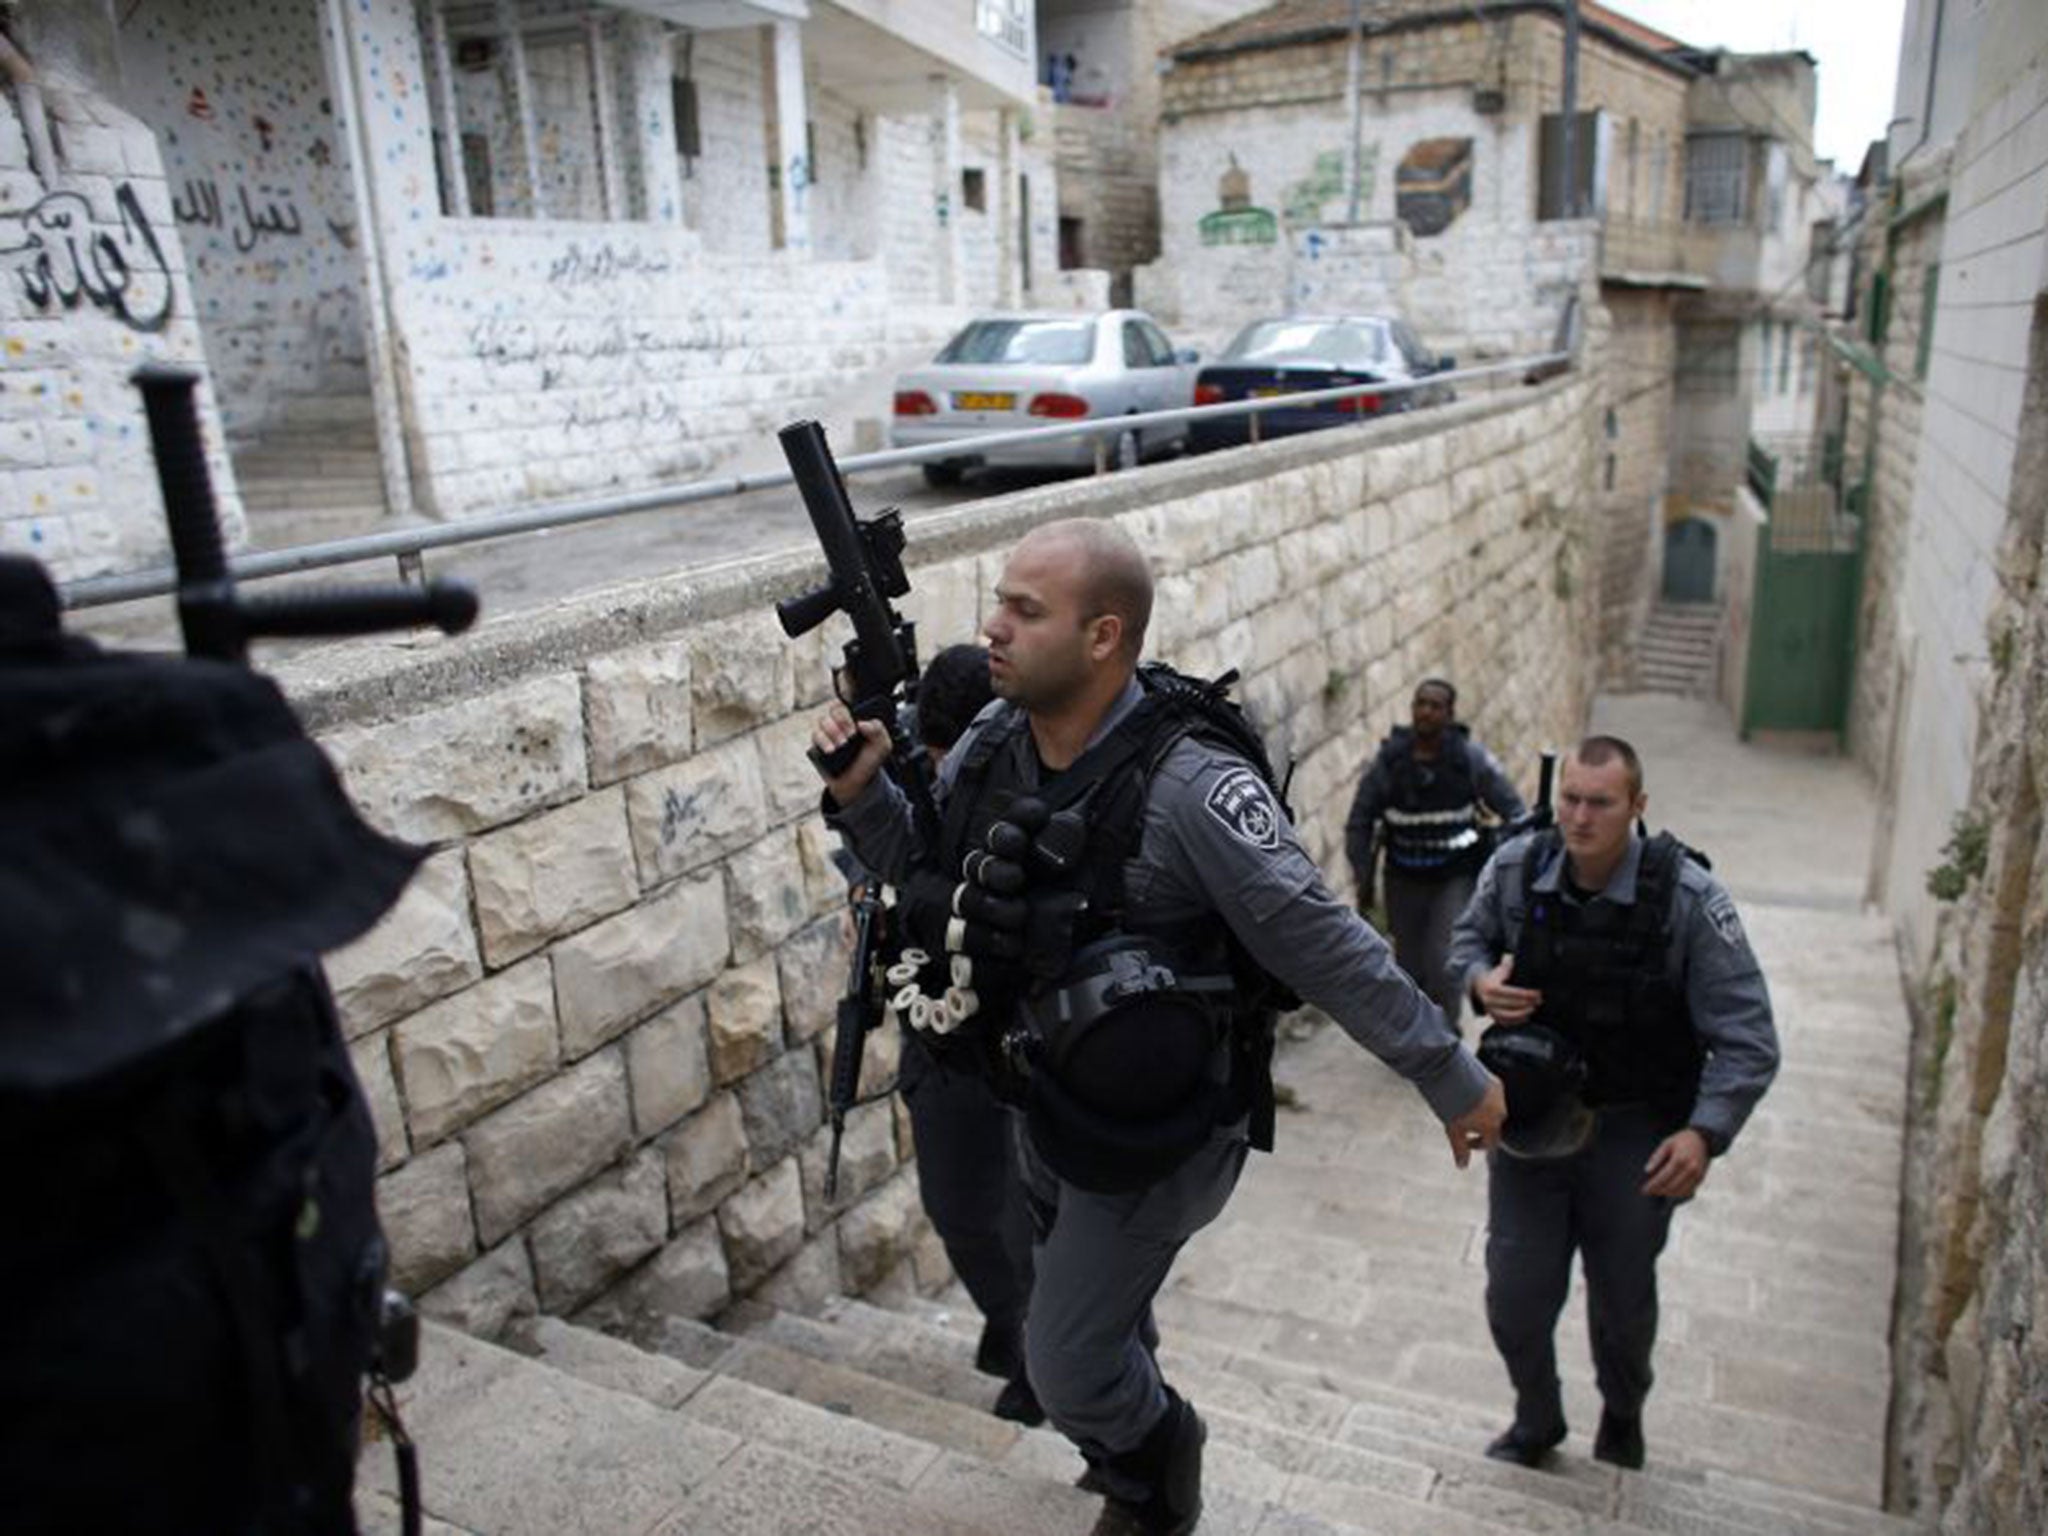 Israeli police officers patrol near the house purchased by Jews (behind, with mural on the wall) in the mostly Arab neighbourhood of Silwan